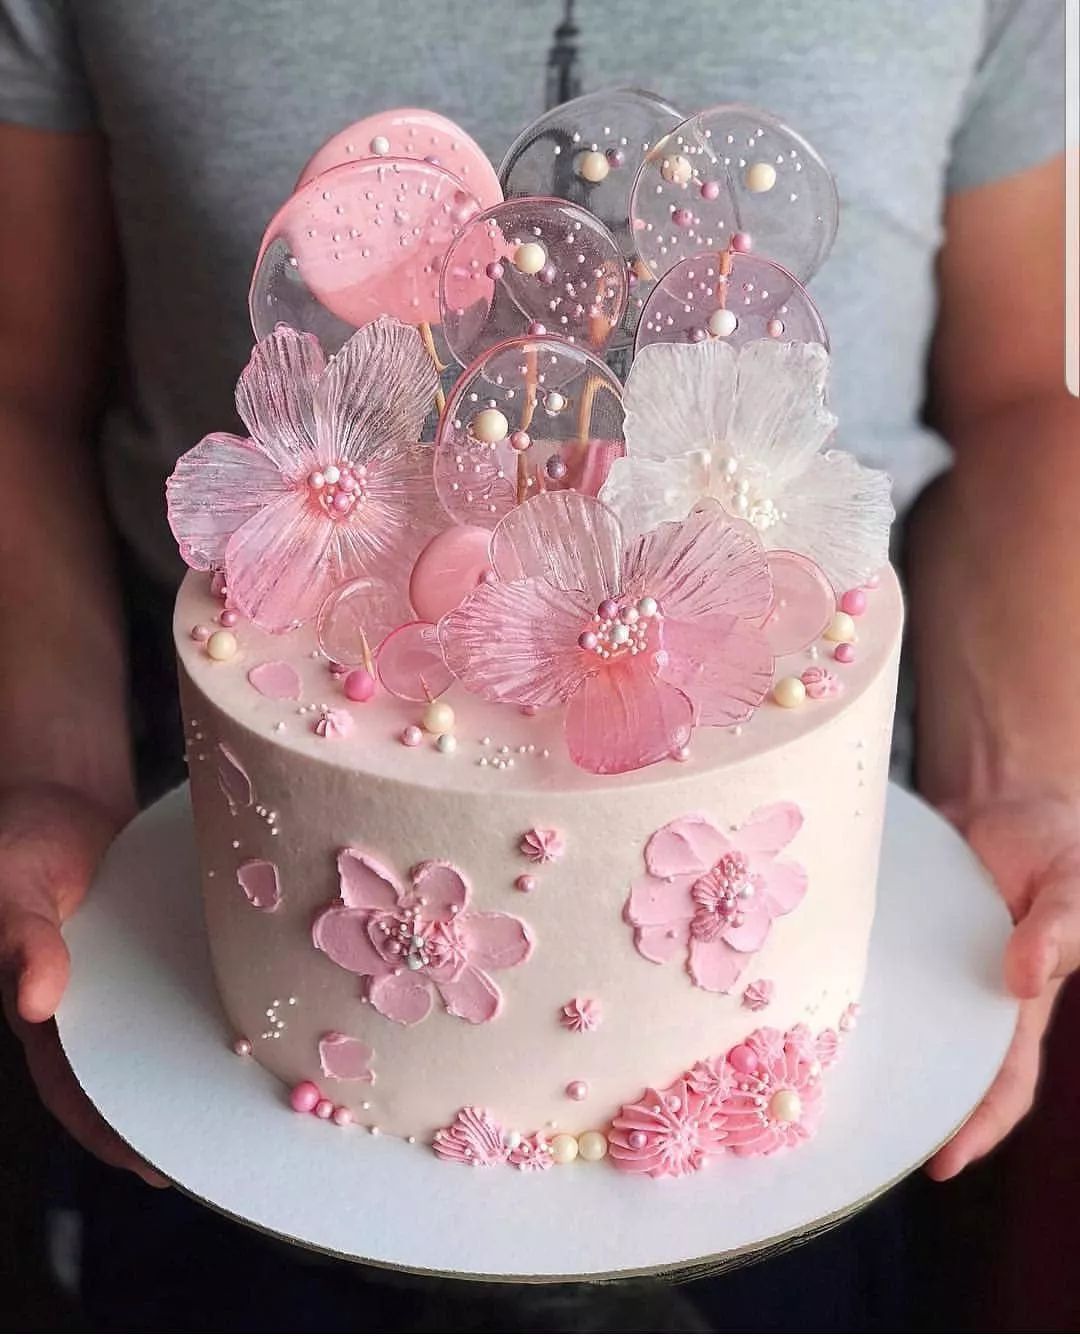 beautiful cake image • ShareChat Photos and Videos